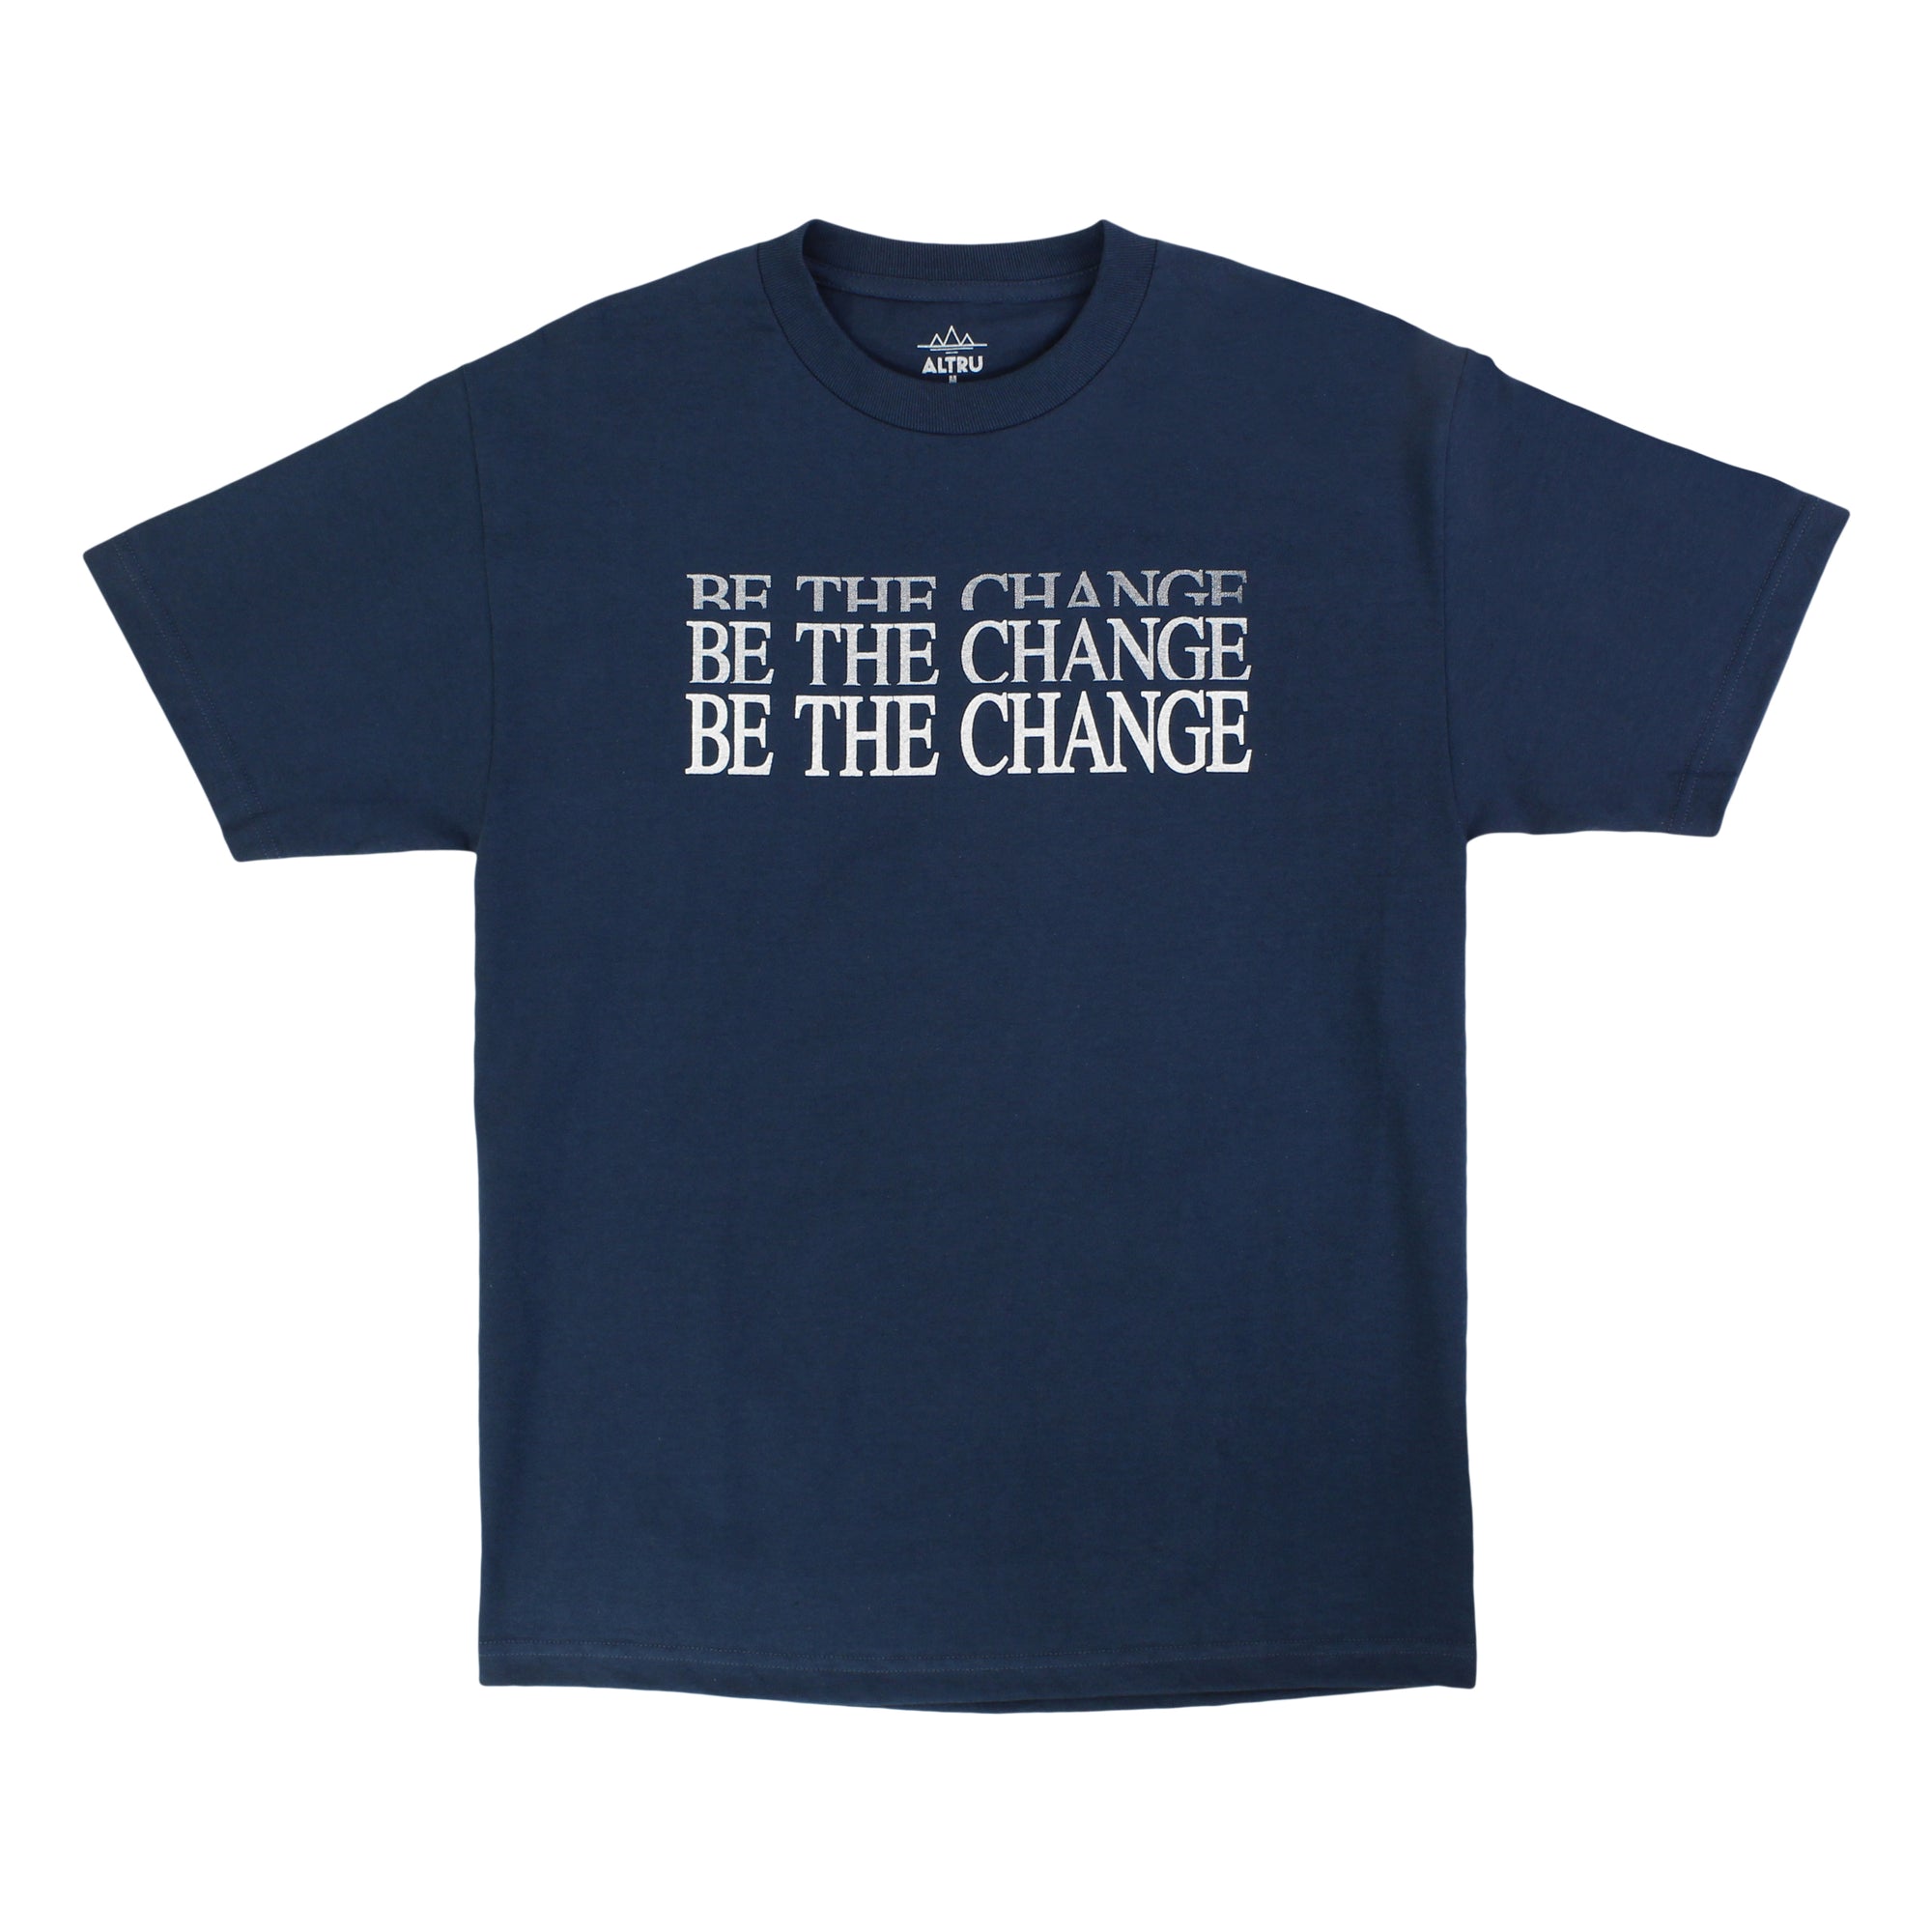 Be The Change navy tee by Altru Apparel